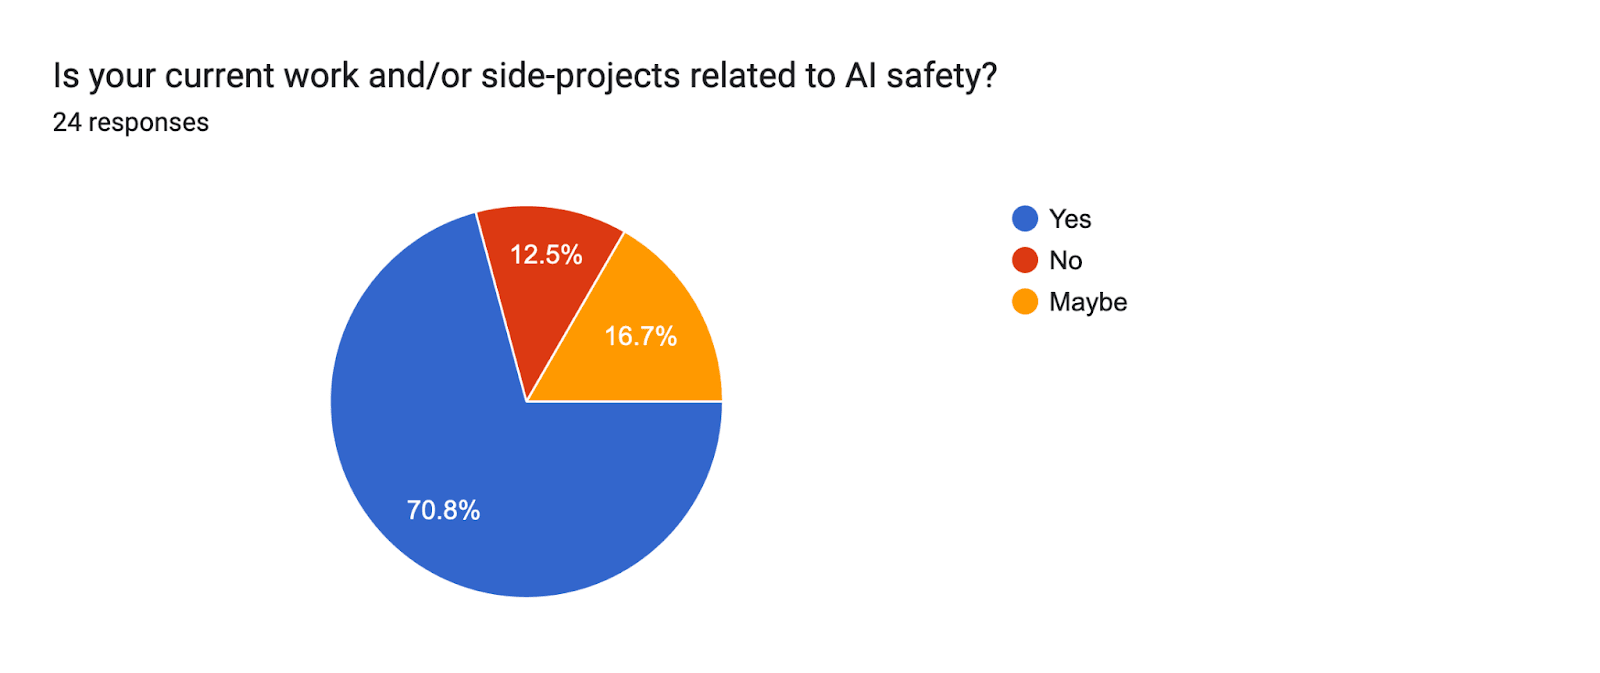 Forms response chart. Question title: Is your current work and/or side-projects related to AI safety?. Number of responses: 24 responses.